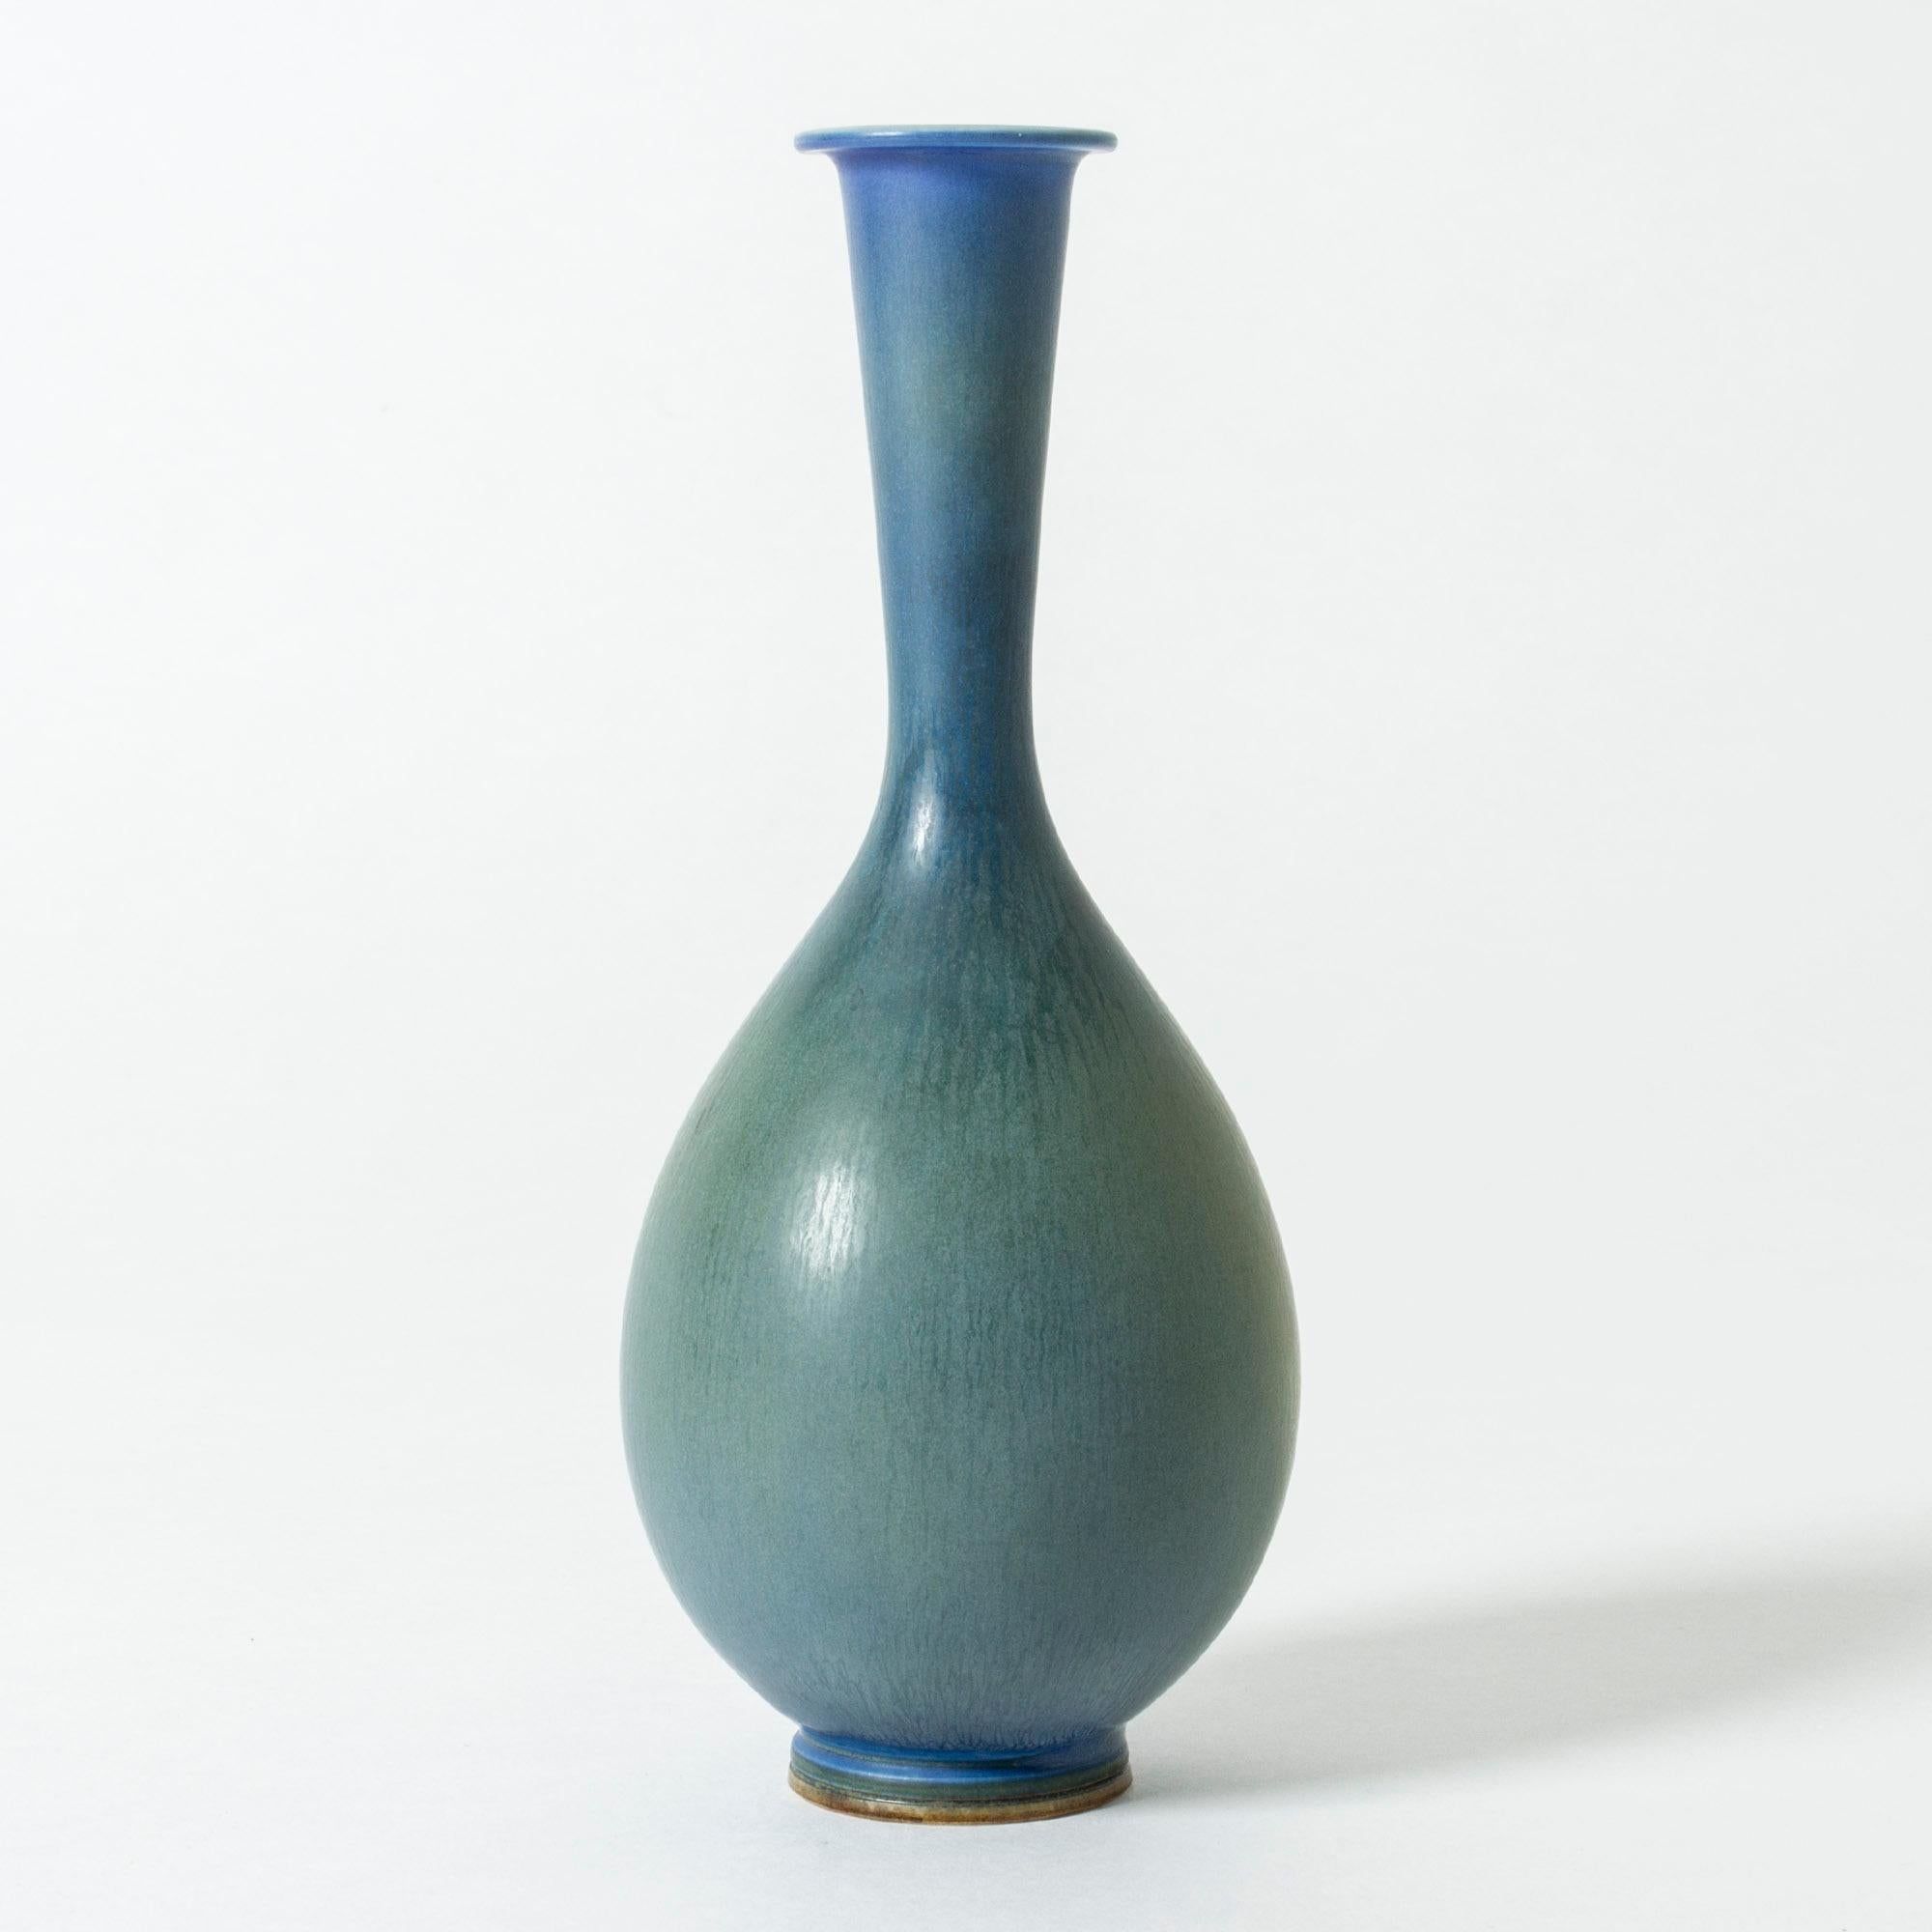 Beautiful stoneware vase by Berndt Friberg in a smooth, Classic shape. Blue hare’s fur glaze blends with green, making a striking effect.